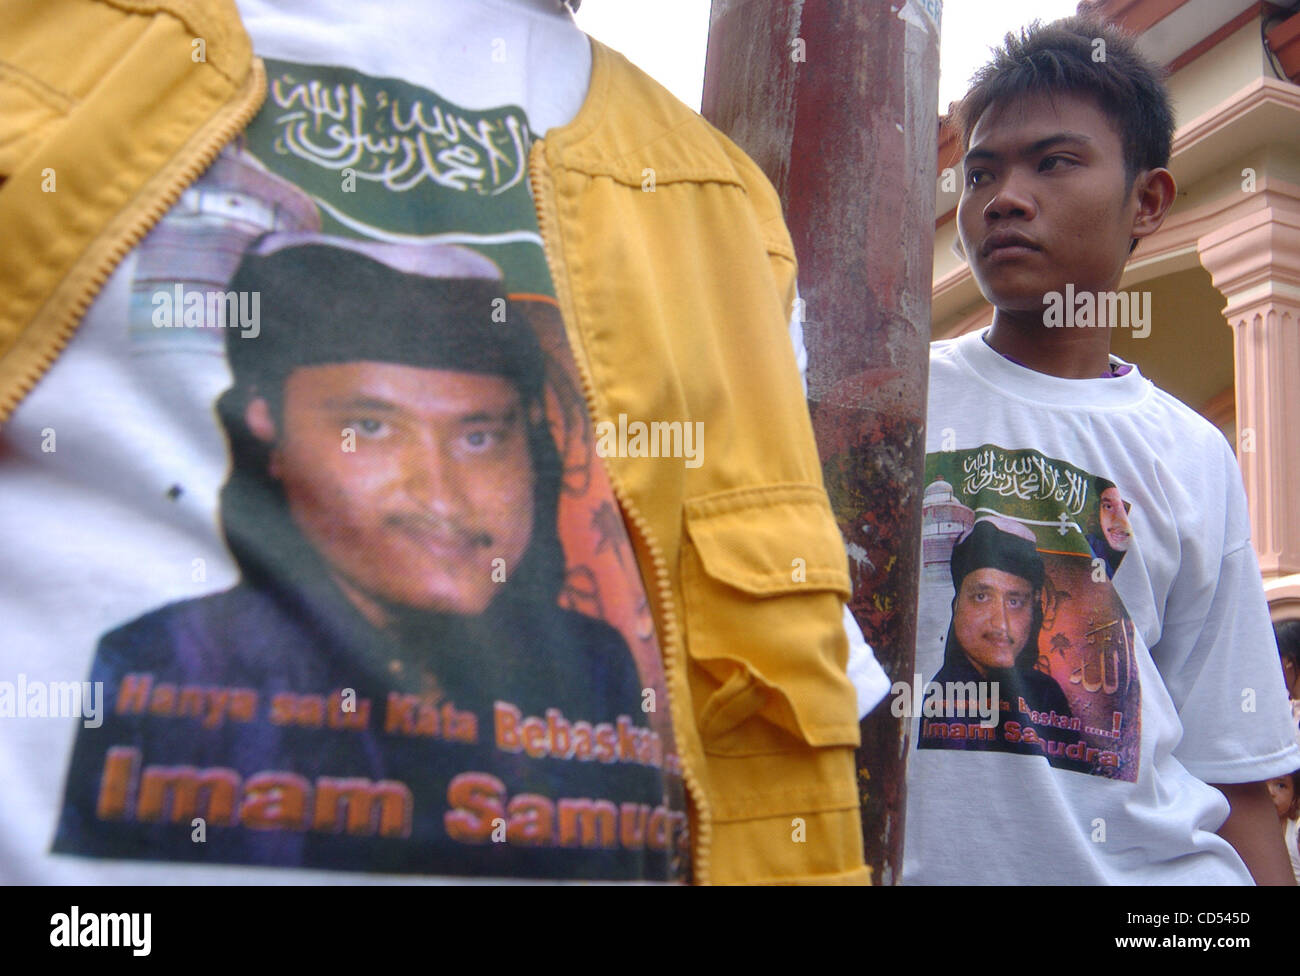 Relative  of Bali bomber Imam Samudra, use tshirt th e bomber's portrait which reads, 'Only one word releases Imam Samudra' in his mother's home in Serang, Banten province, Indonesia, Nov 5, 2008. Three Indonesian militants on death row for the 2002 Bali bombings have exhausted legal options and can Stock Photo